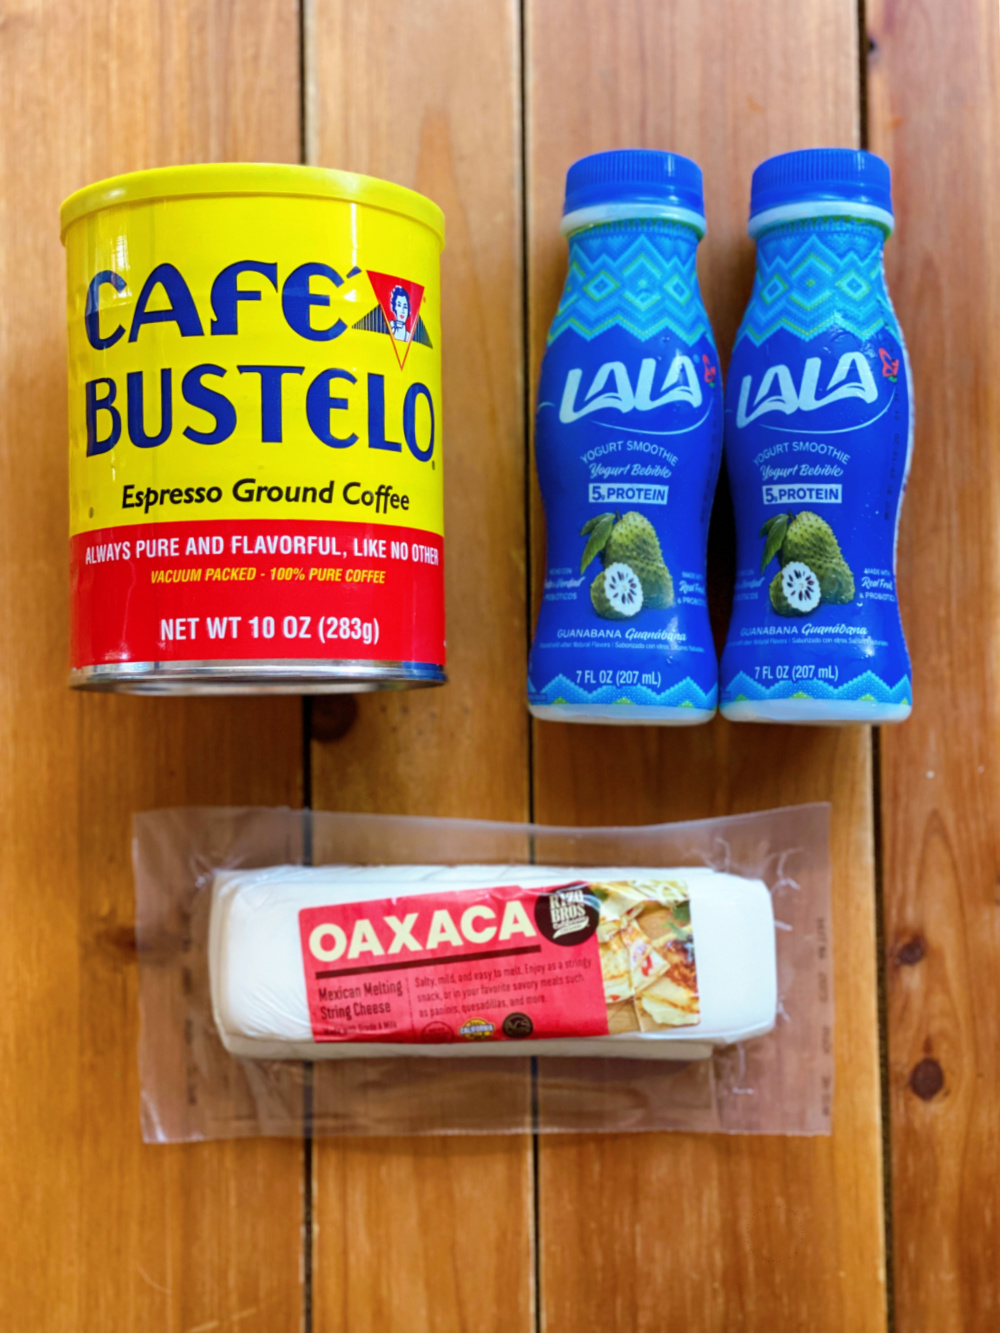 This is the Cafe Bustelo, the LALA yogurt smoothie, and the Oaxaca cheese from Rizo Bros